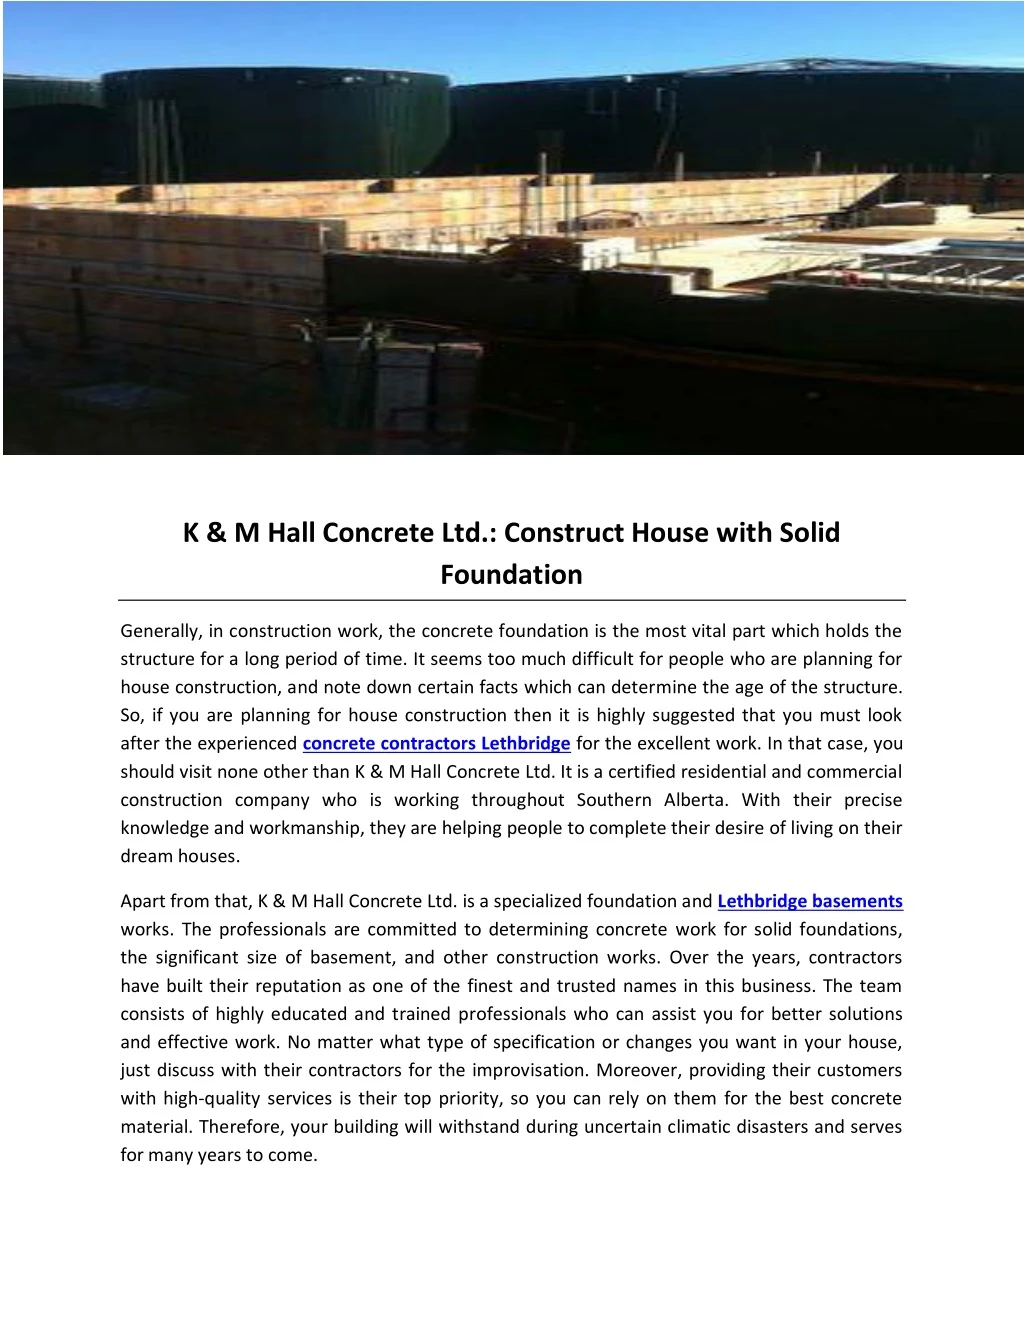 k m hall concrete ltd construct house with solid